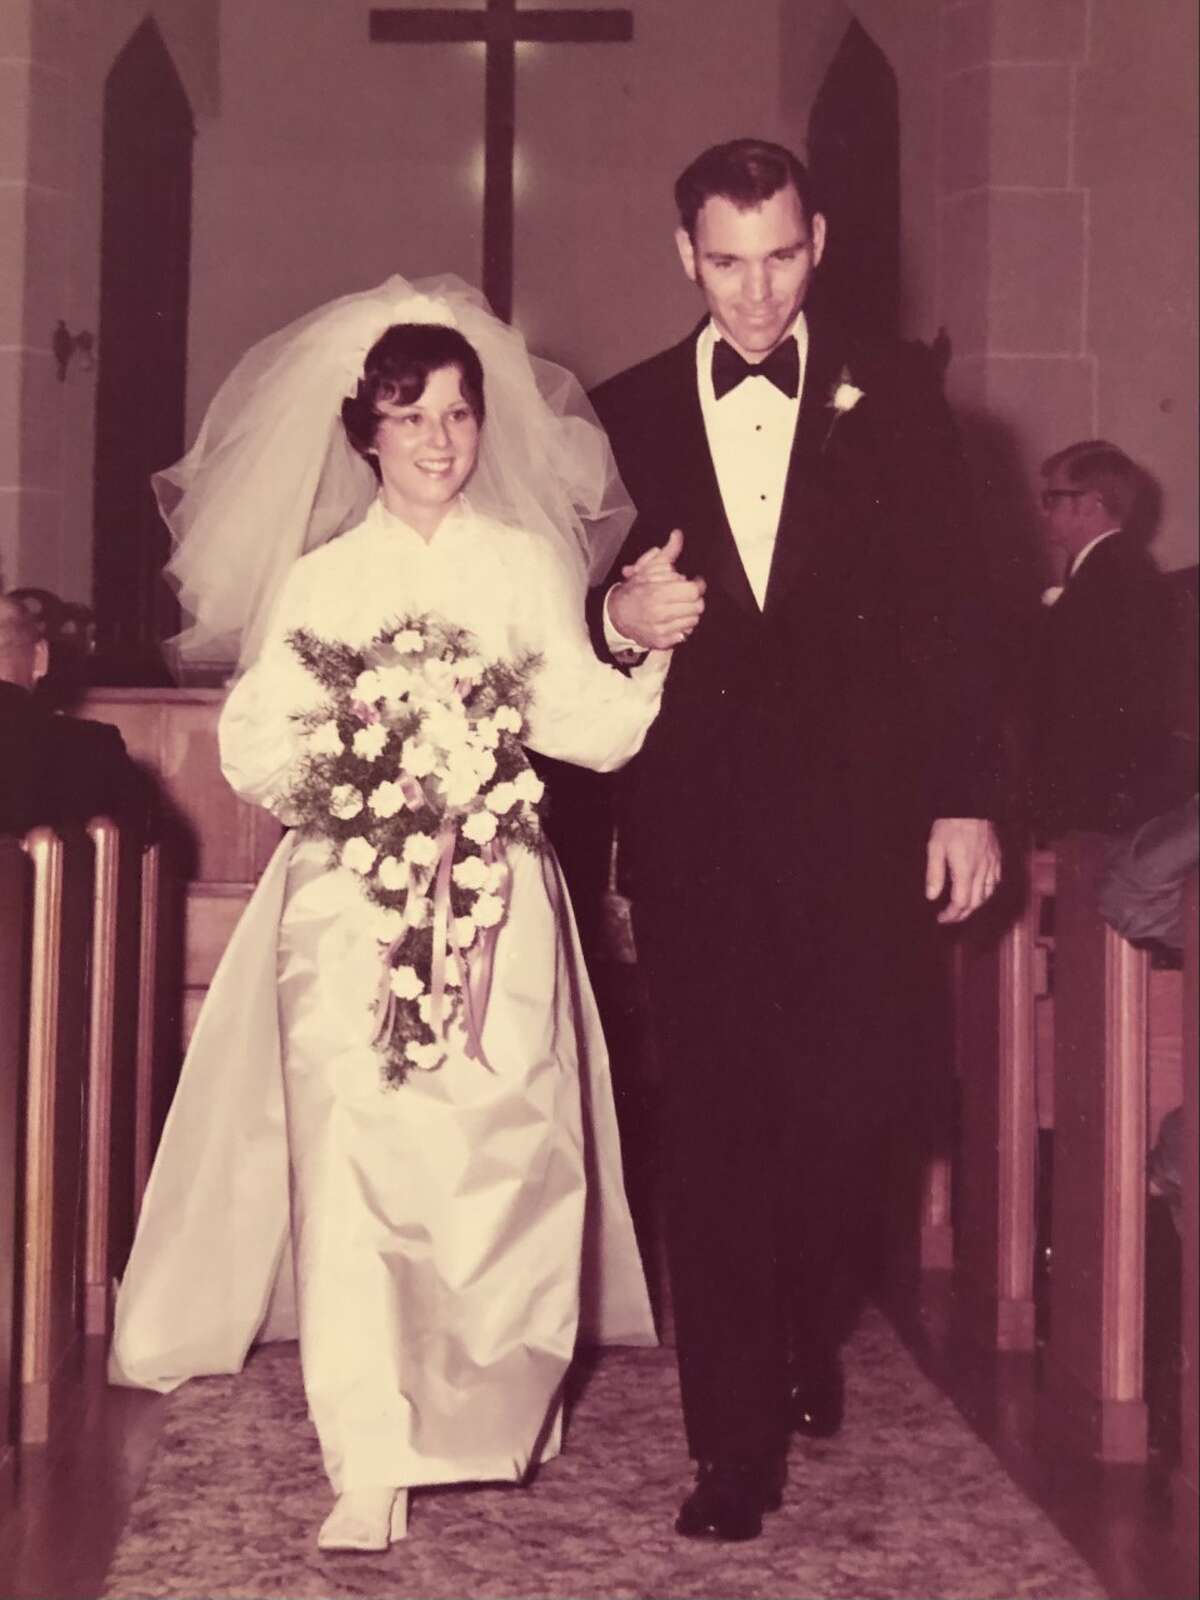 Jerry and Debbie Cardwell at their wedding